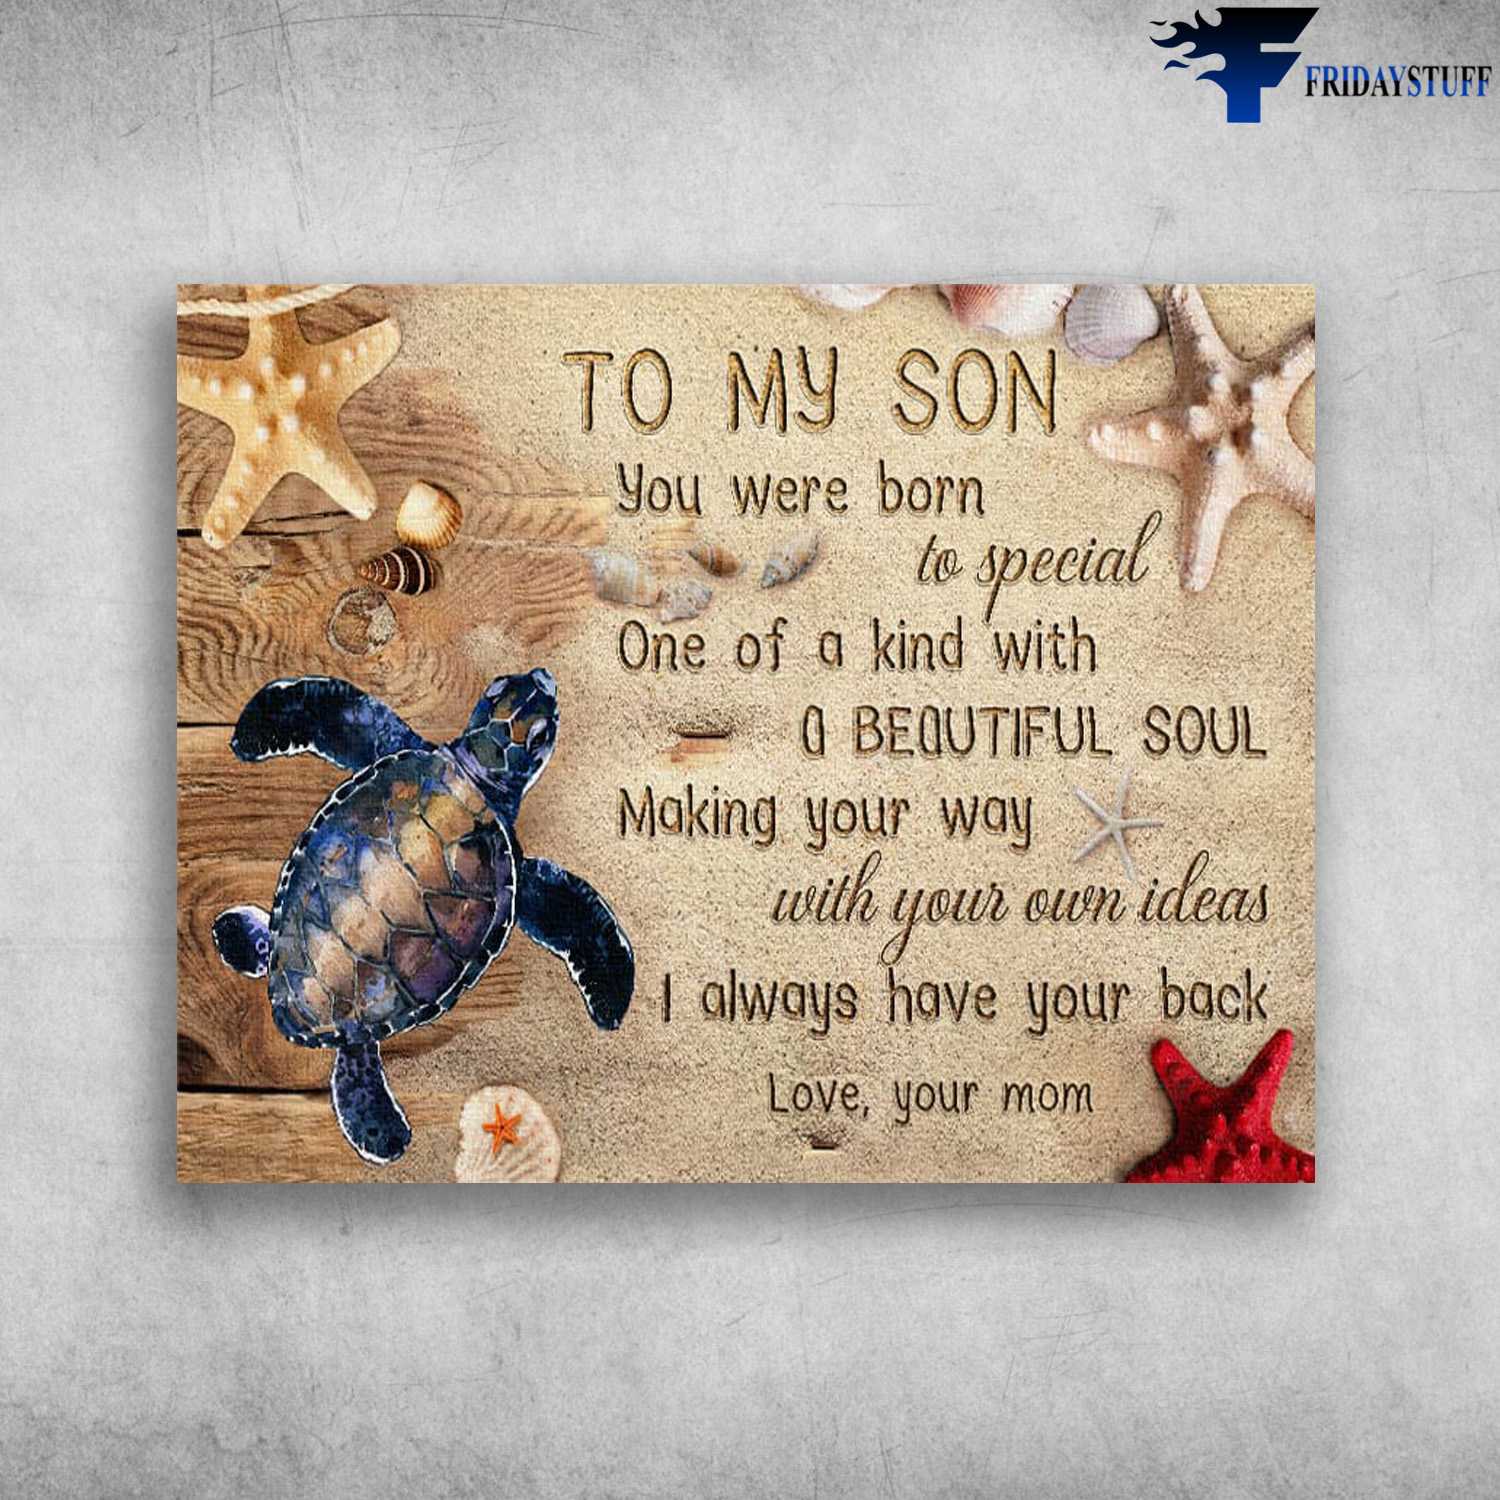 Turtle Beach, Mom And Son, To My Son, You Were Born To Special, One Of A Kind With A Beautiful Soul, Making Your Way, With Your Own Ideas, I Always Have Your Back